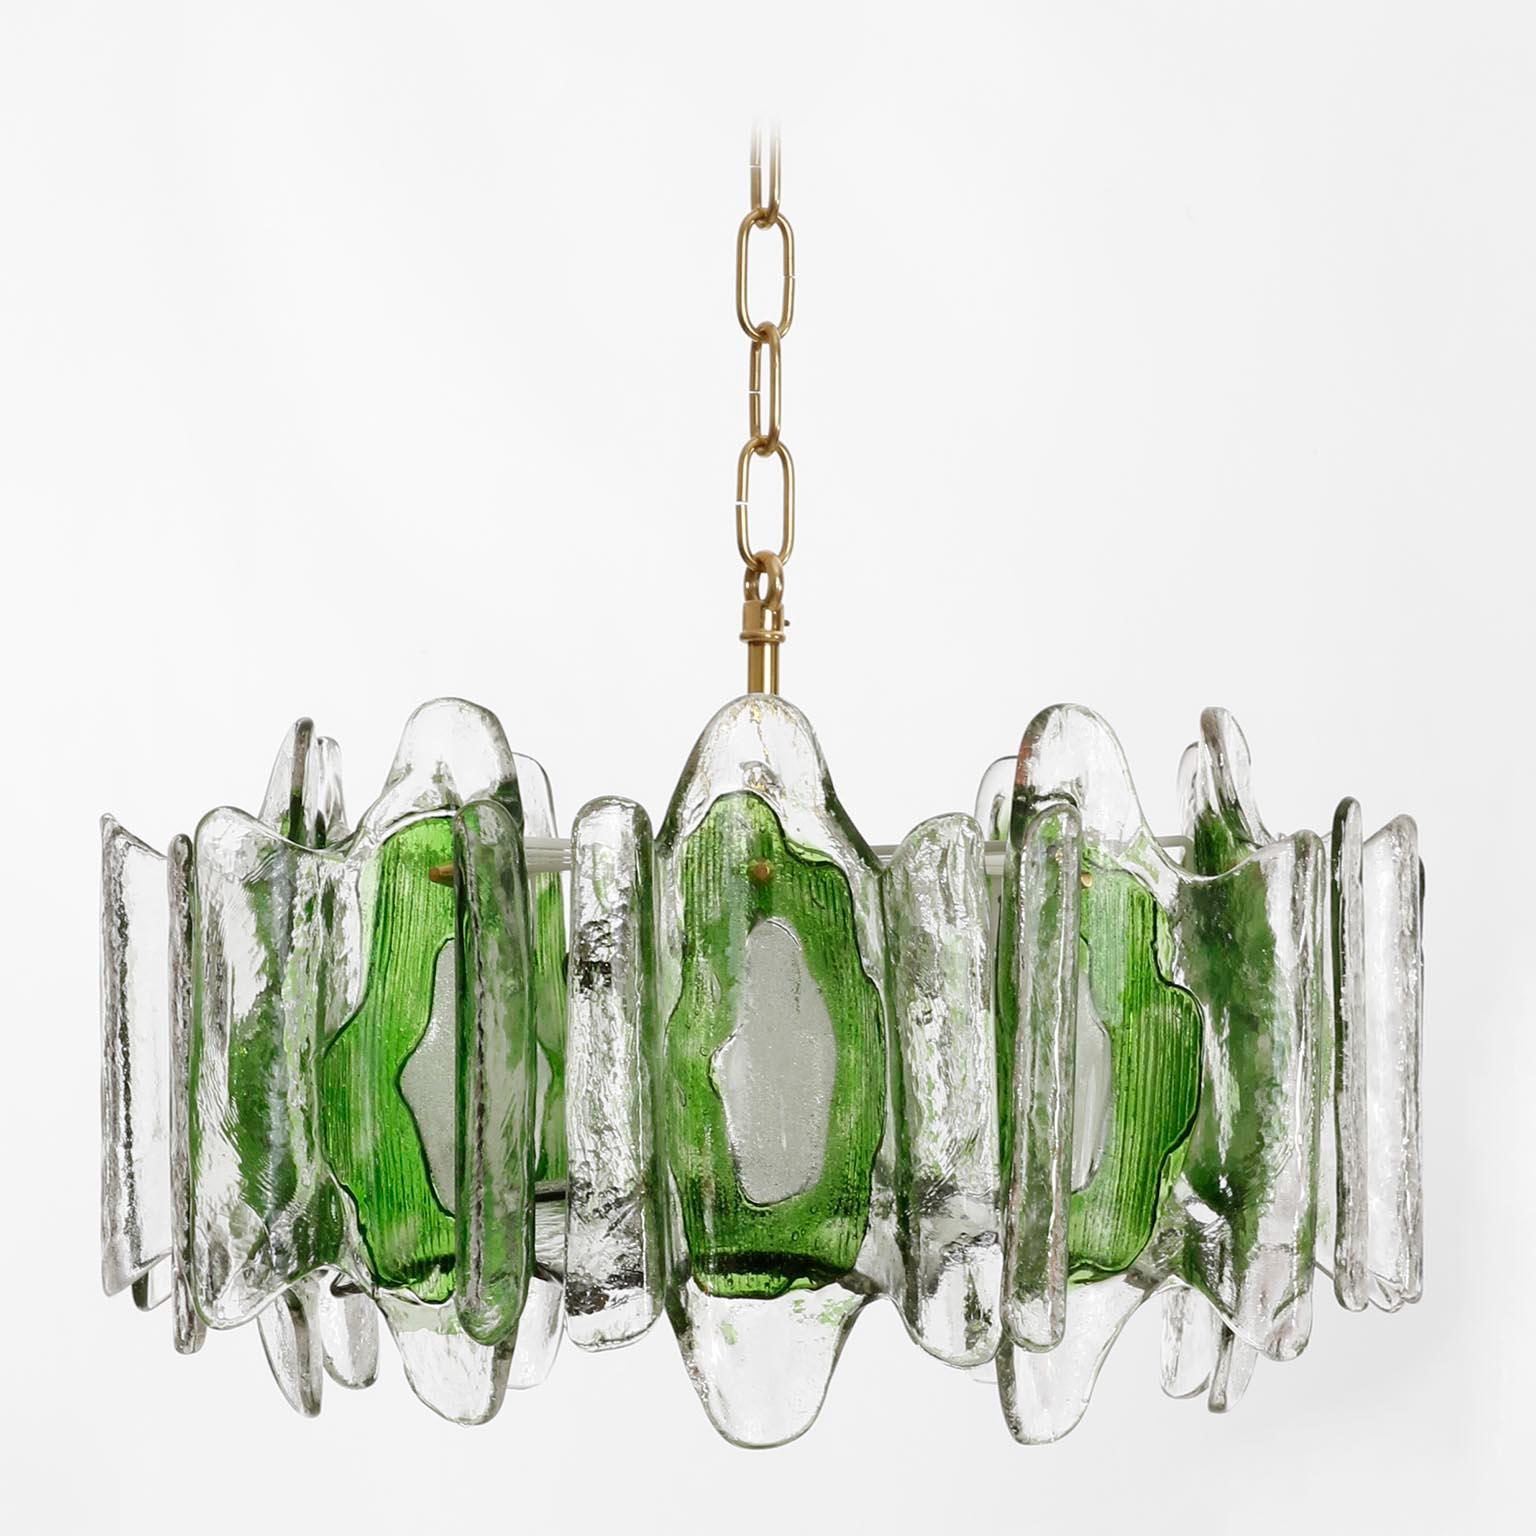 A beautiful pendant chandelier made of melted green and clear Murano glass by Kalmar, manufactured in midcentury, circa 1970 (late 1960s or early 1970s).
The light fixture has five sockets for small Edison screw base bulbs type E14 (max. 40W per